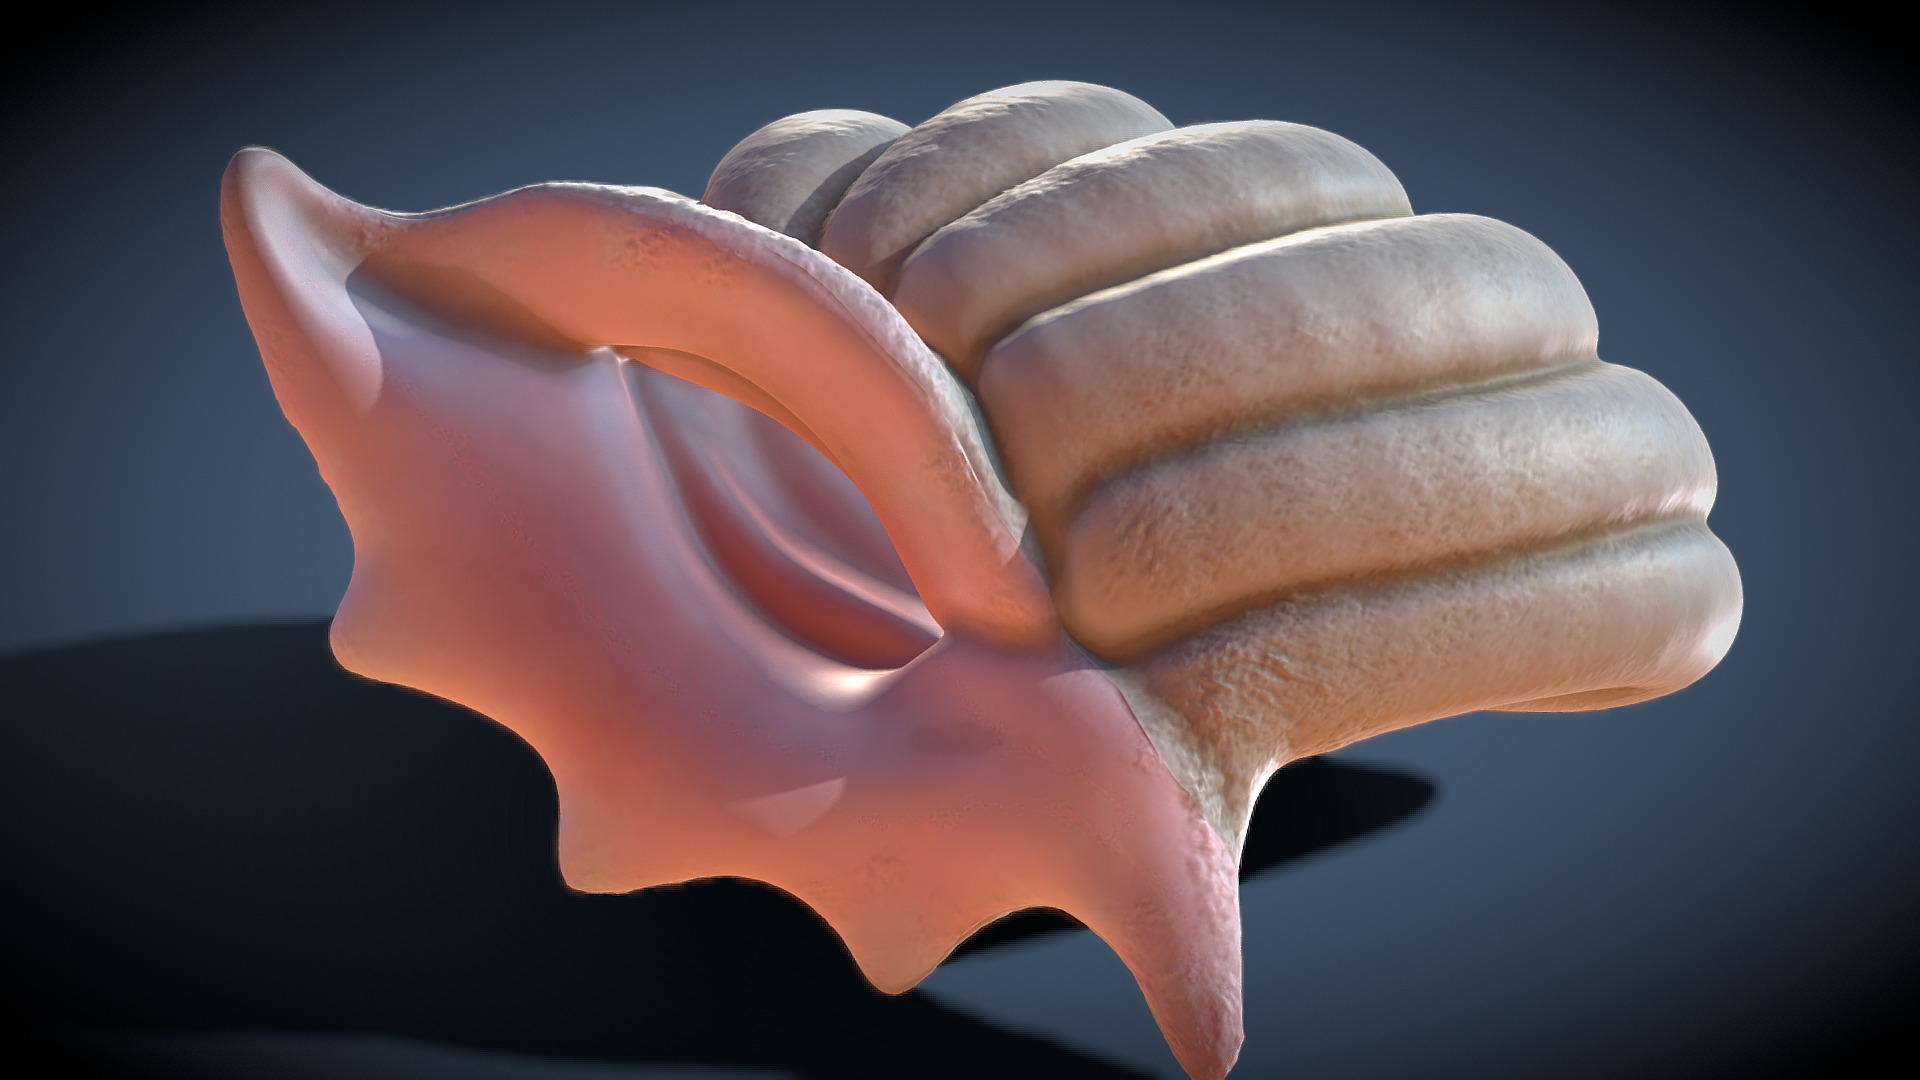 3D model MerMay 2020 – Shell - This is a 3D model of the MerMay 2020 - Shell. The 3D model is about a close-up of a human hand.